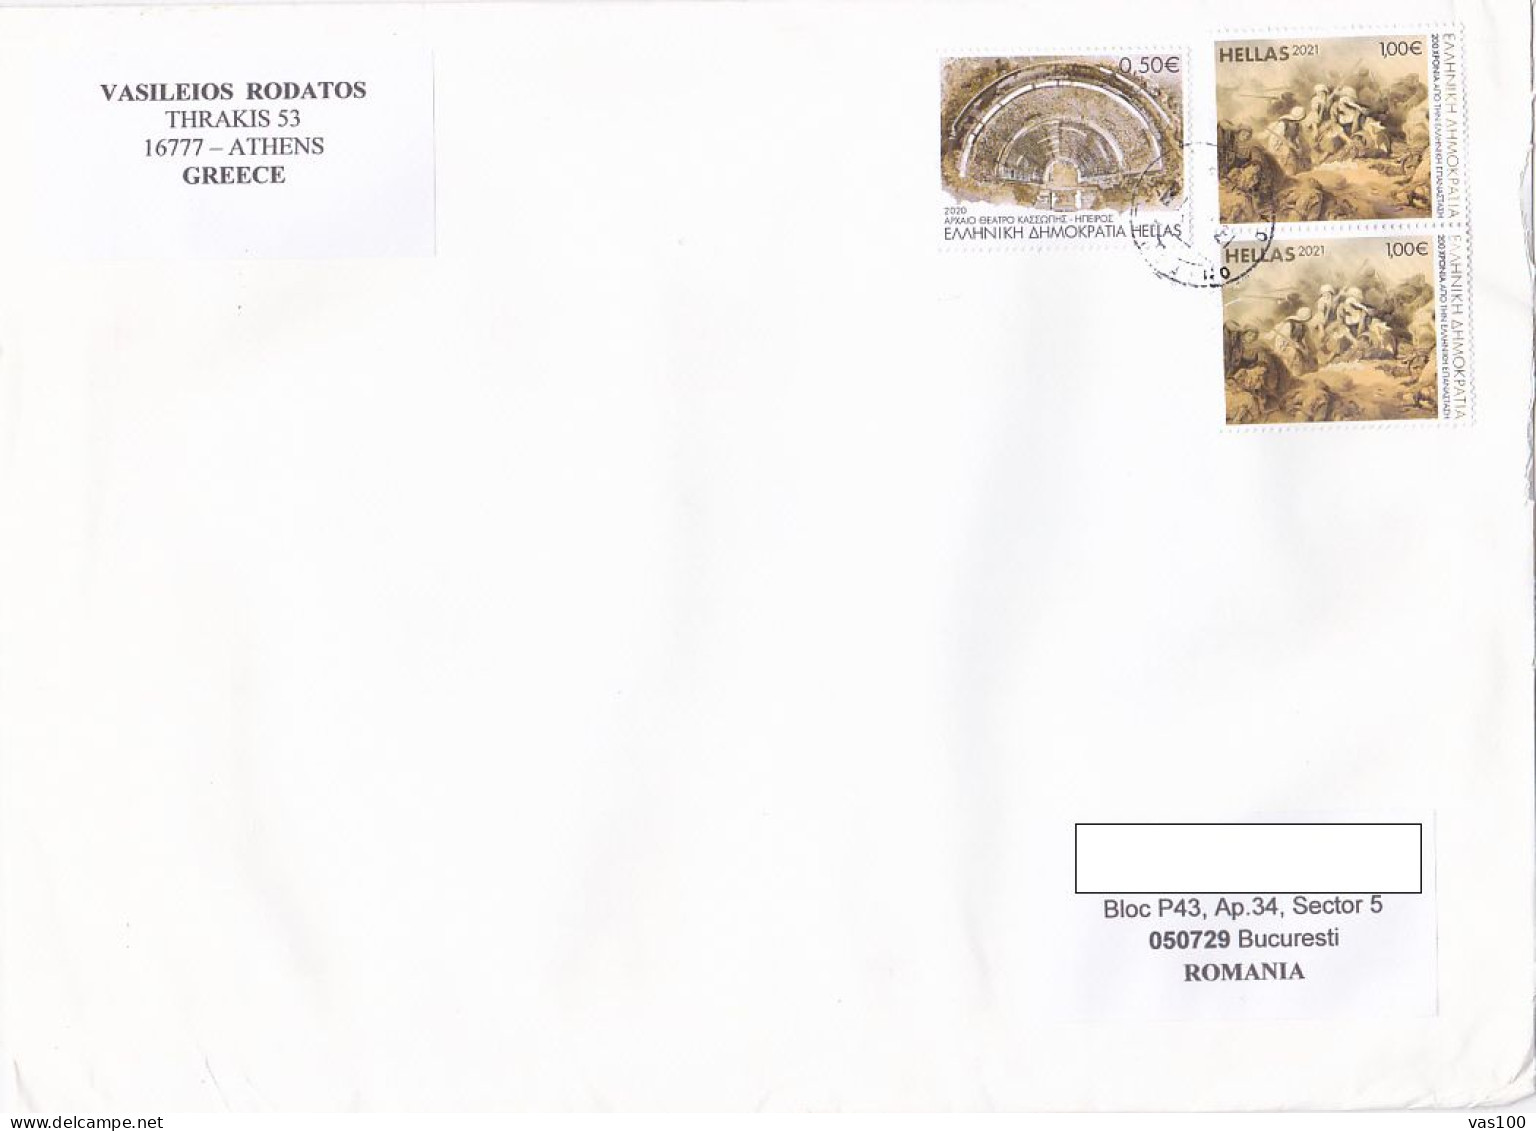 ANCIENT THEATER, GREEK REVOLUTION ANNIVERSARY, STAMPS ON COVER, 2022, GREECE - Covers & Documents